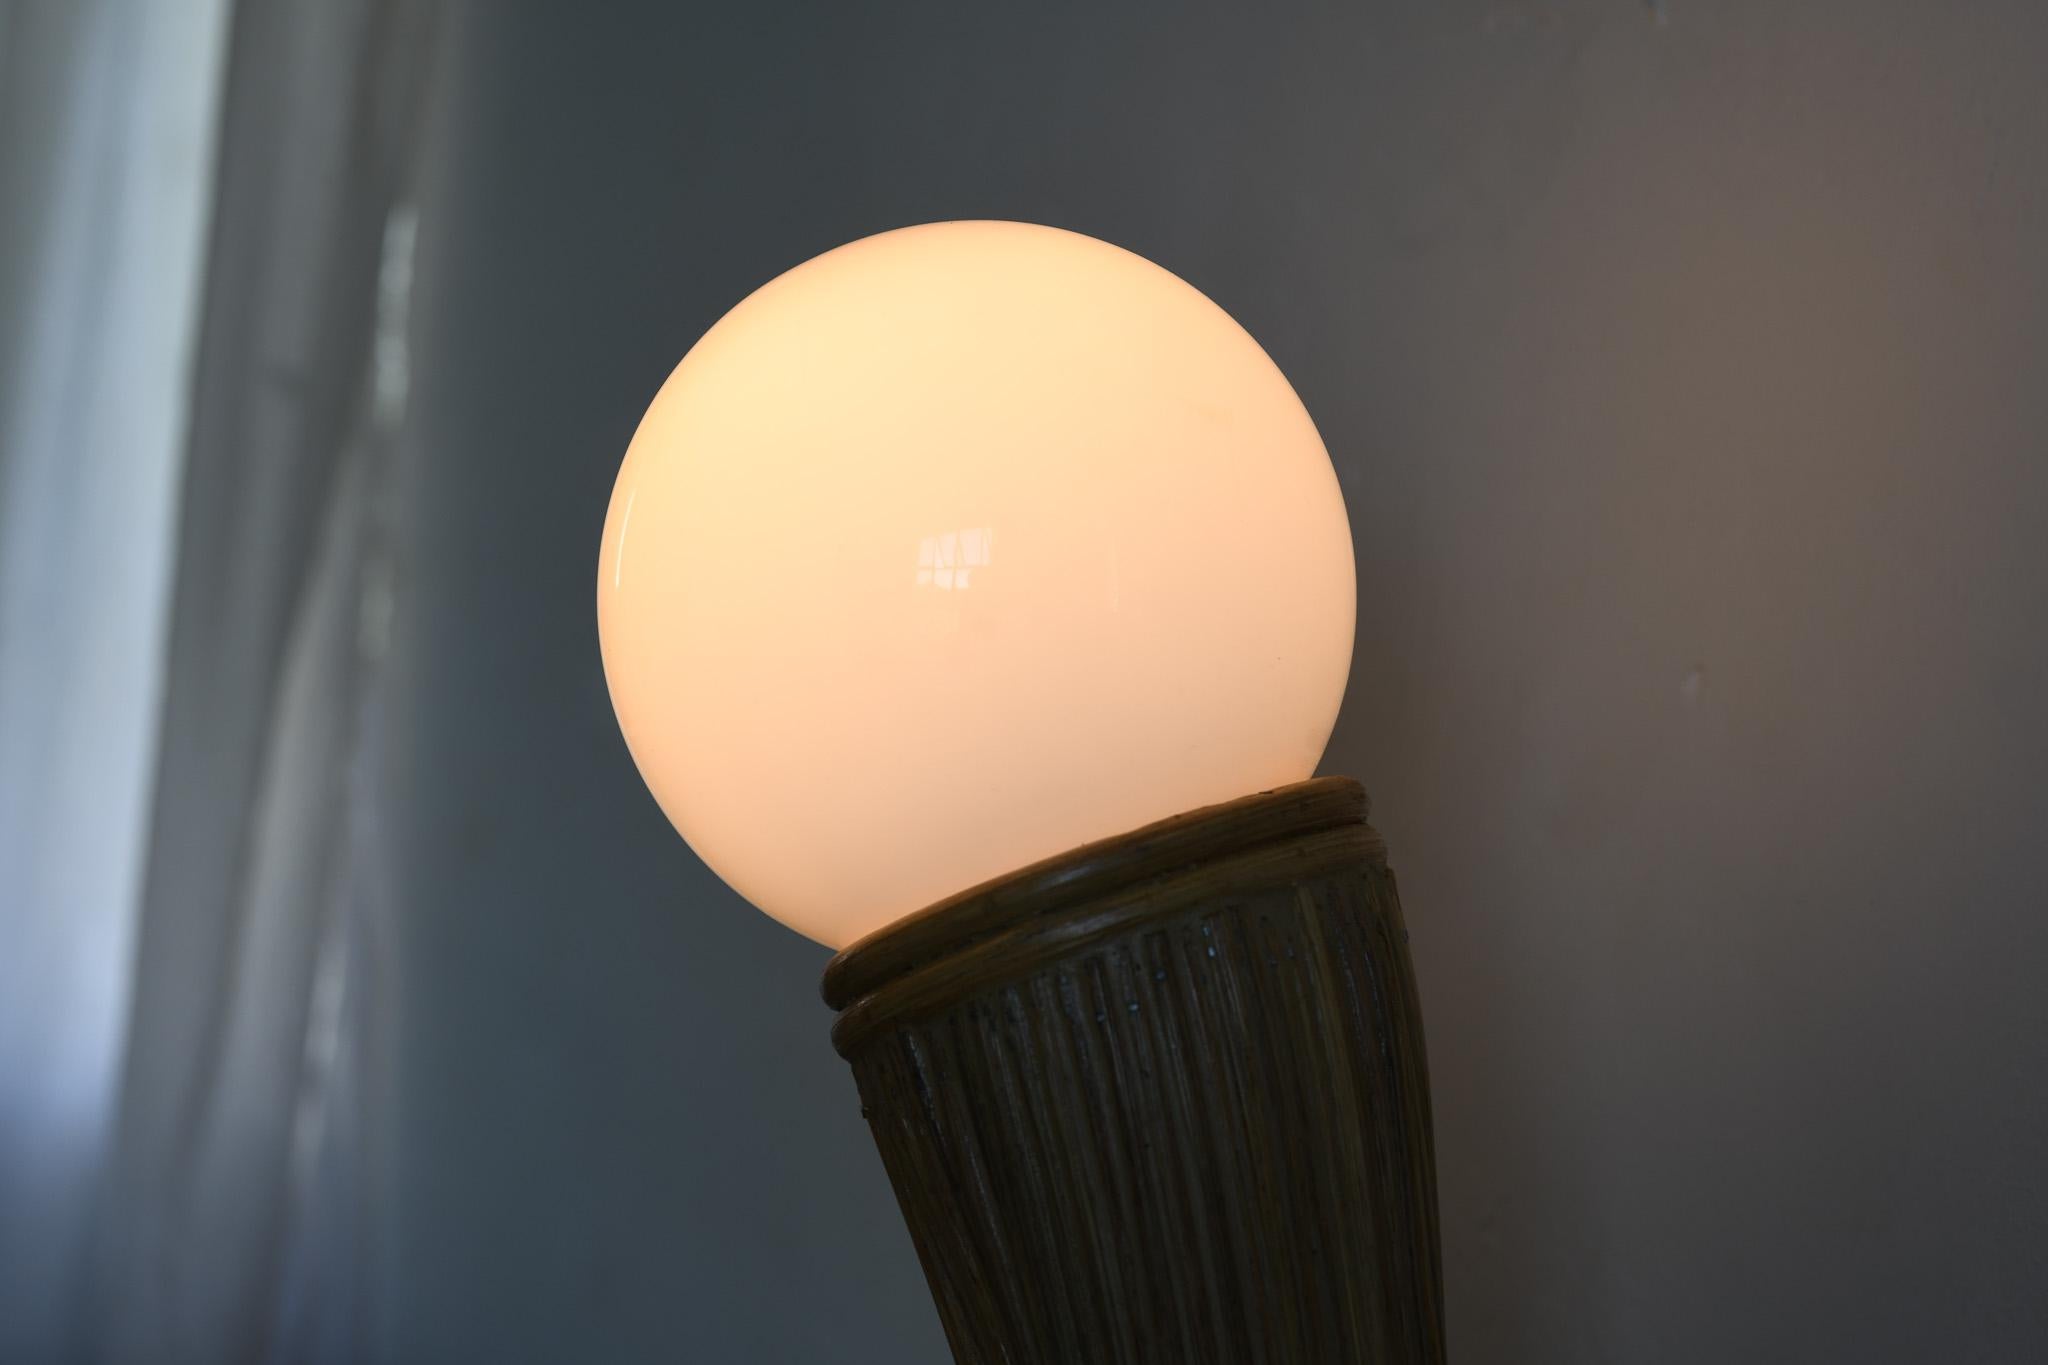 This lamp features a sleek mid century modern design with a base made of pencil reed and a space age inspired dome shade. It is both functional and stylish, perfect for adding a touch of retro cool to any space. The unique combination of materials